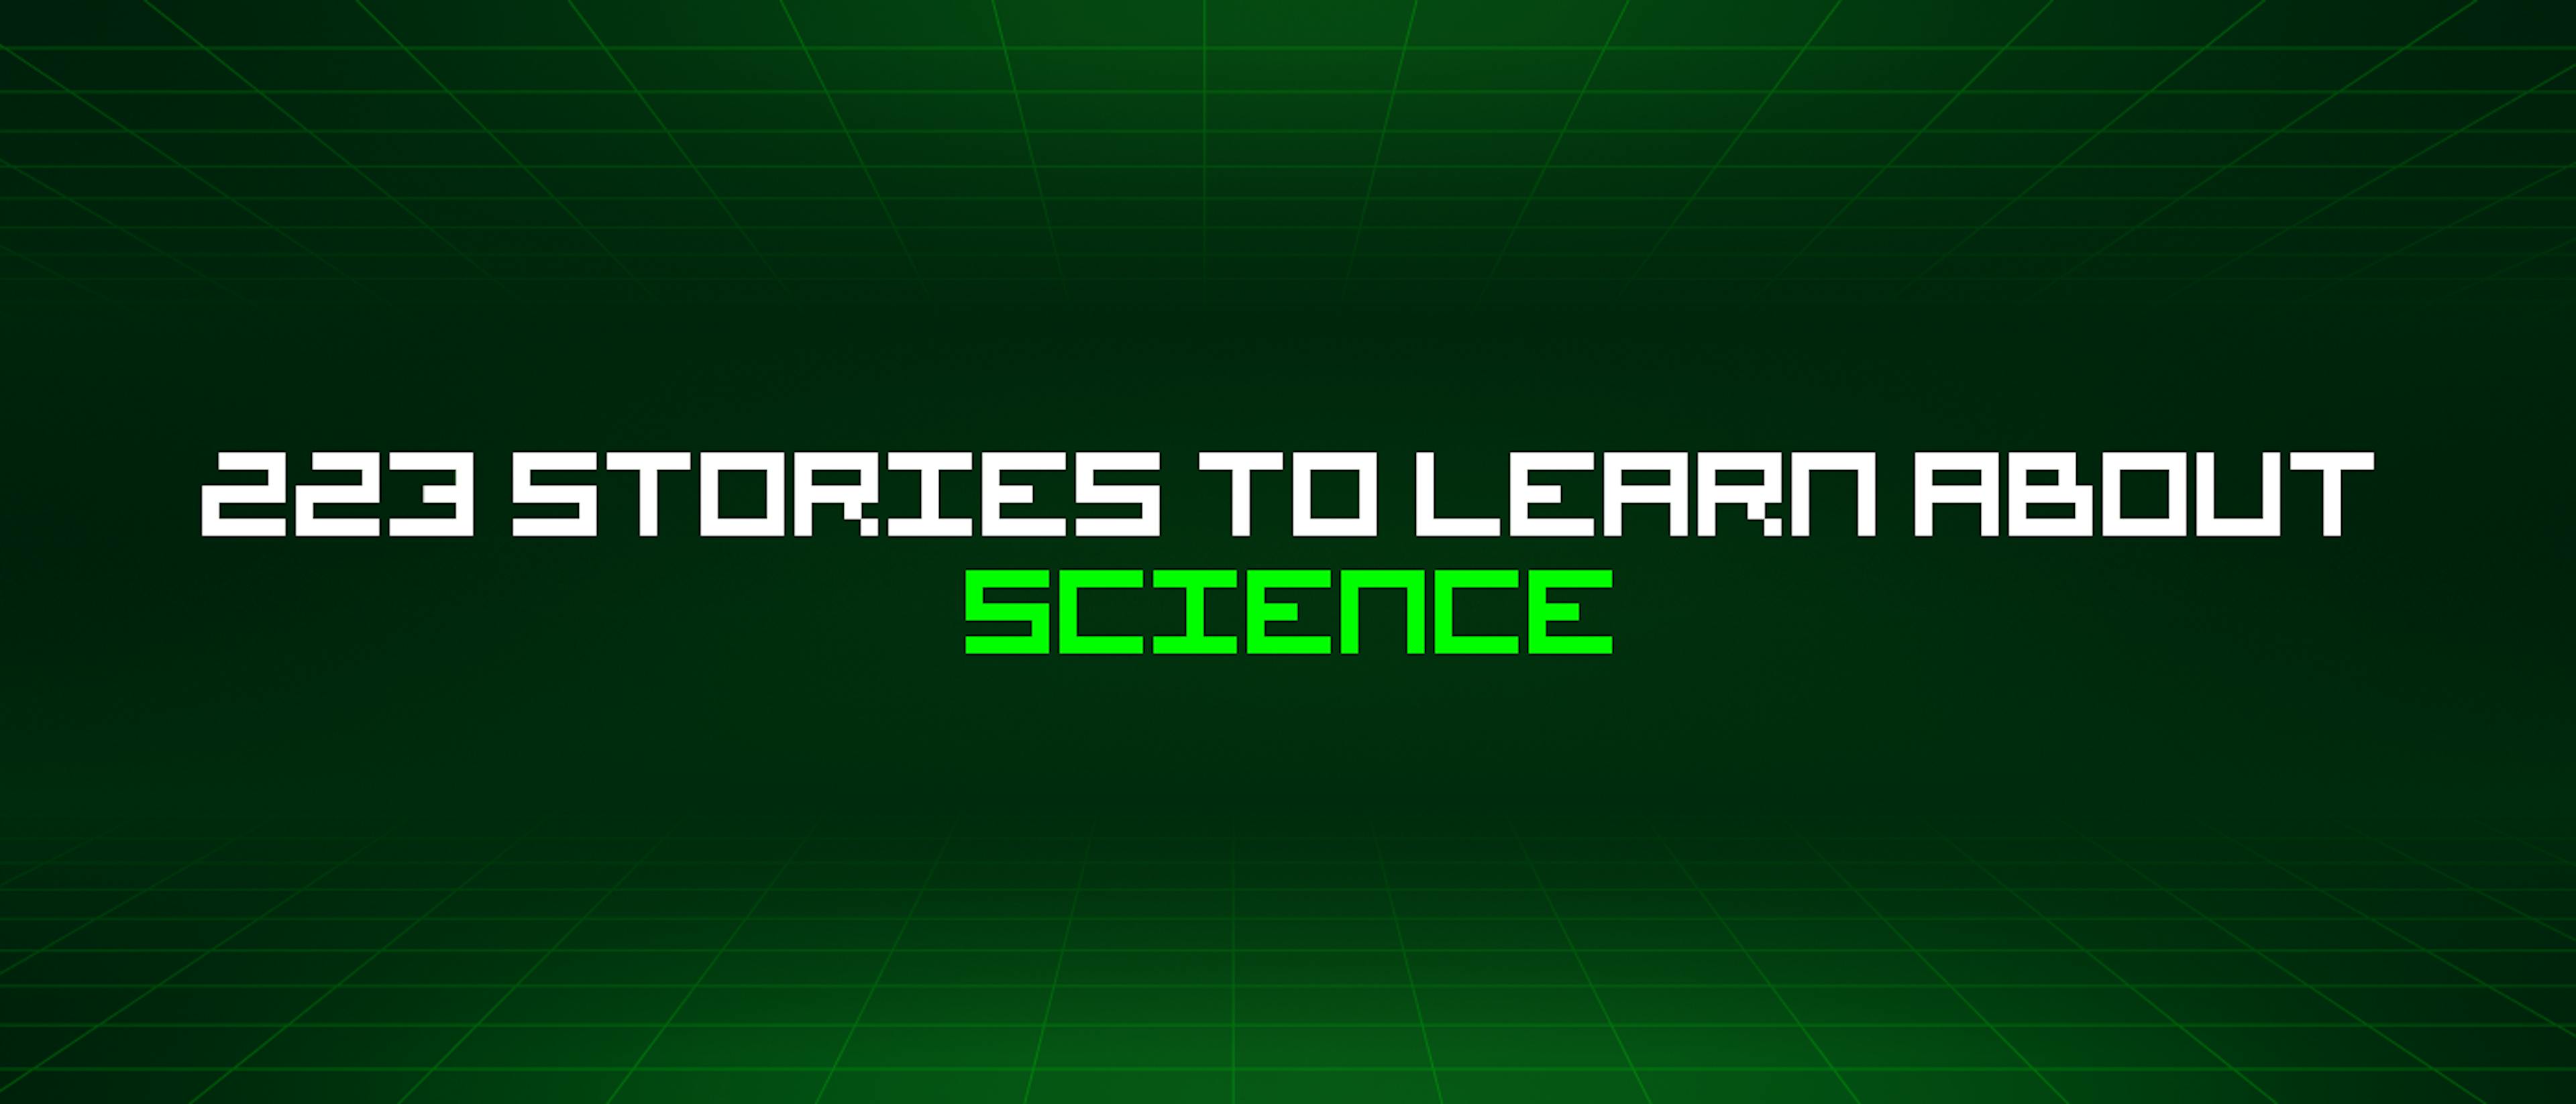 featured image - 223 Stories To Learn About Science